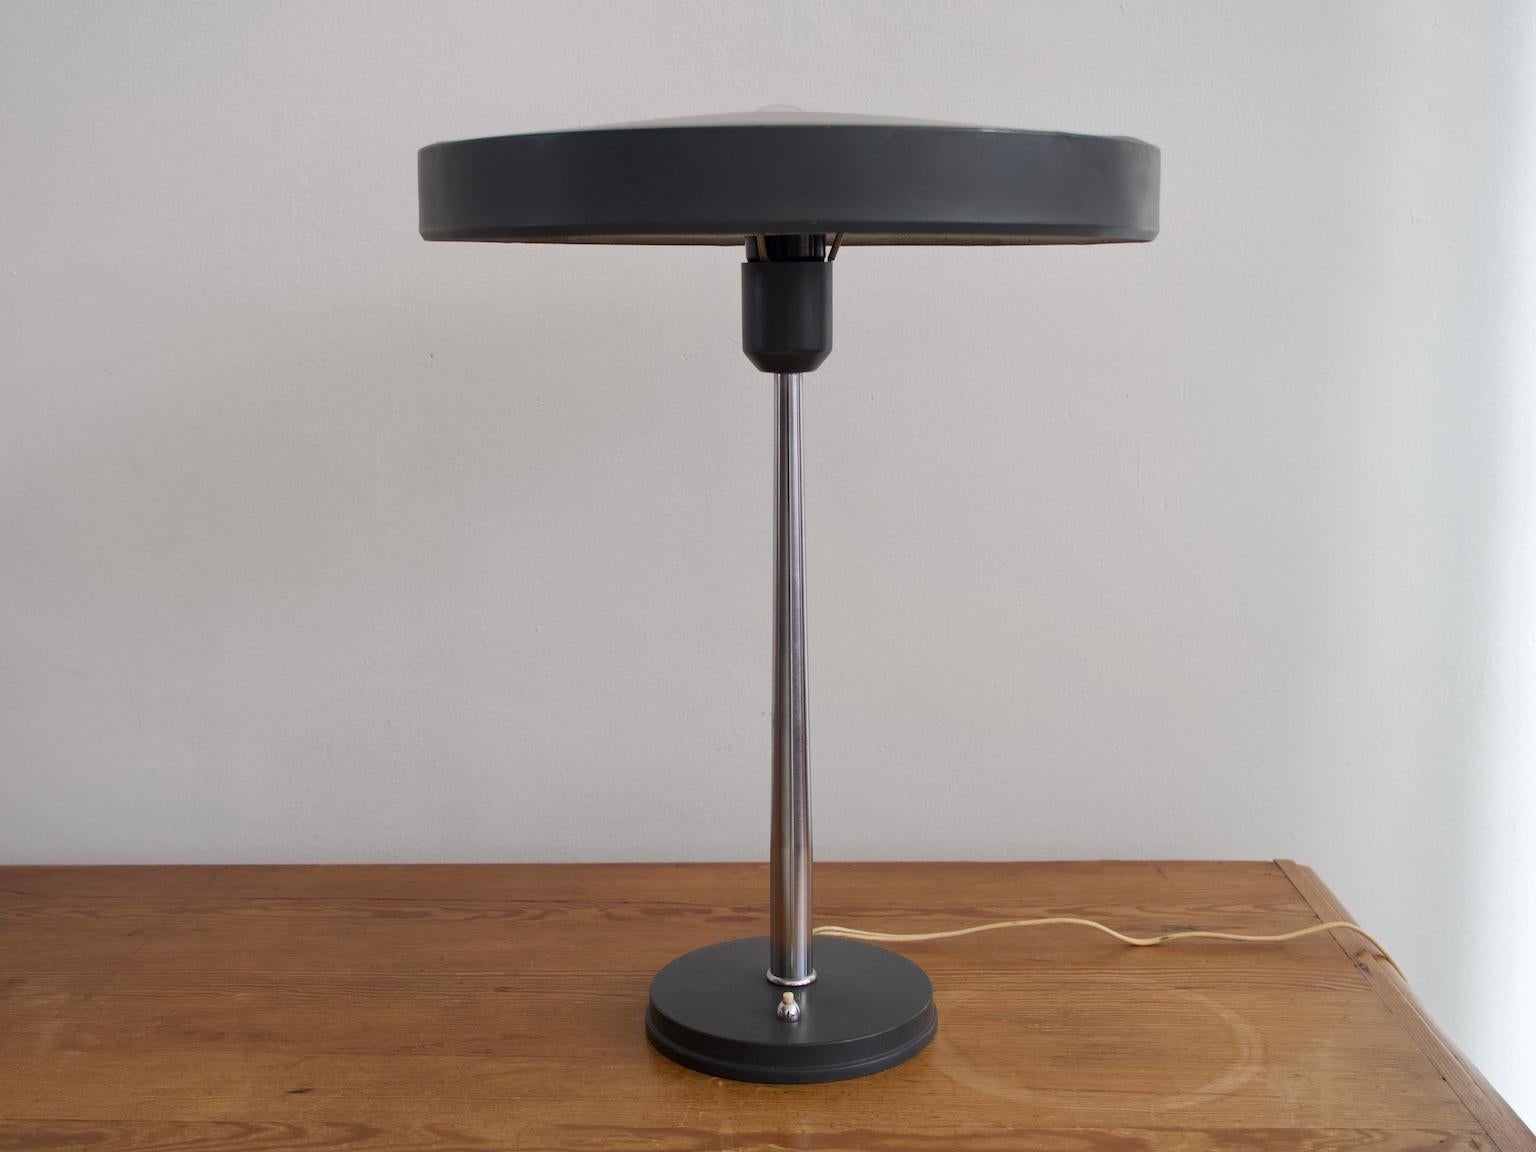 Model Timor desk lamp was designed by Louis Kalff for Philips and it is one of his most famous designs. The lamps features a conically shaped chromed steel rod and dark grey painted aluminum base and round screen. European plug.